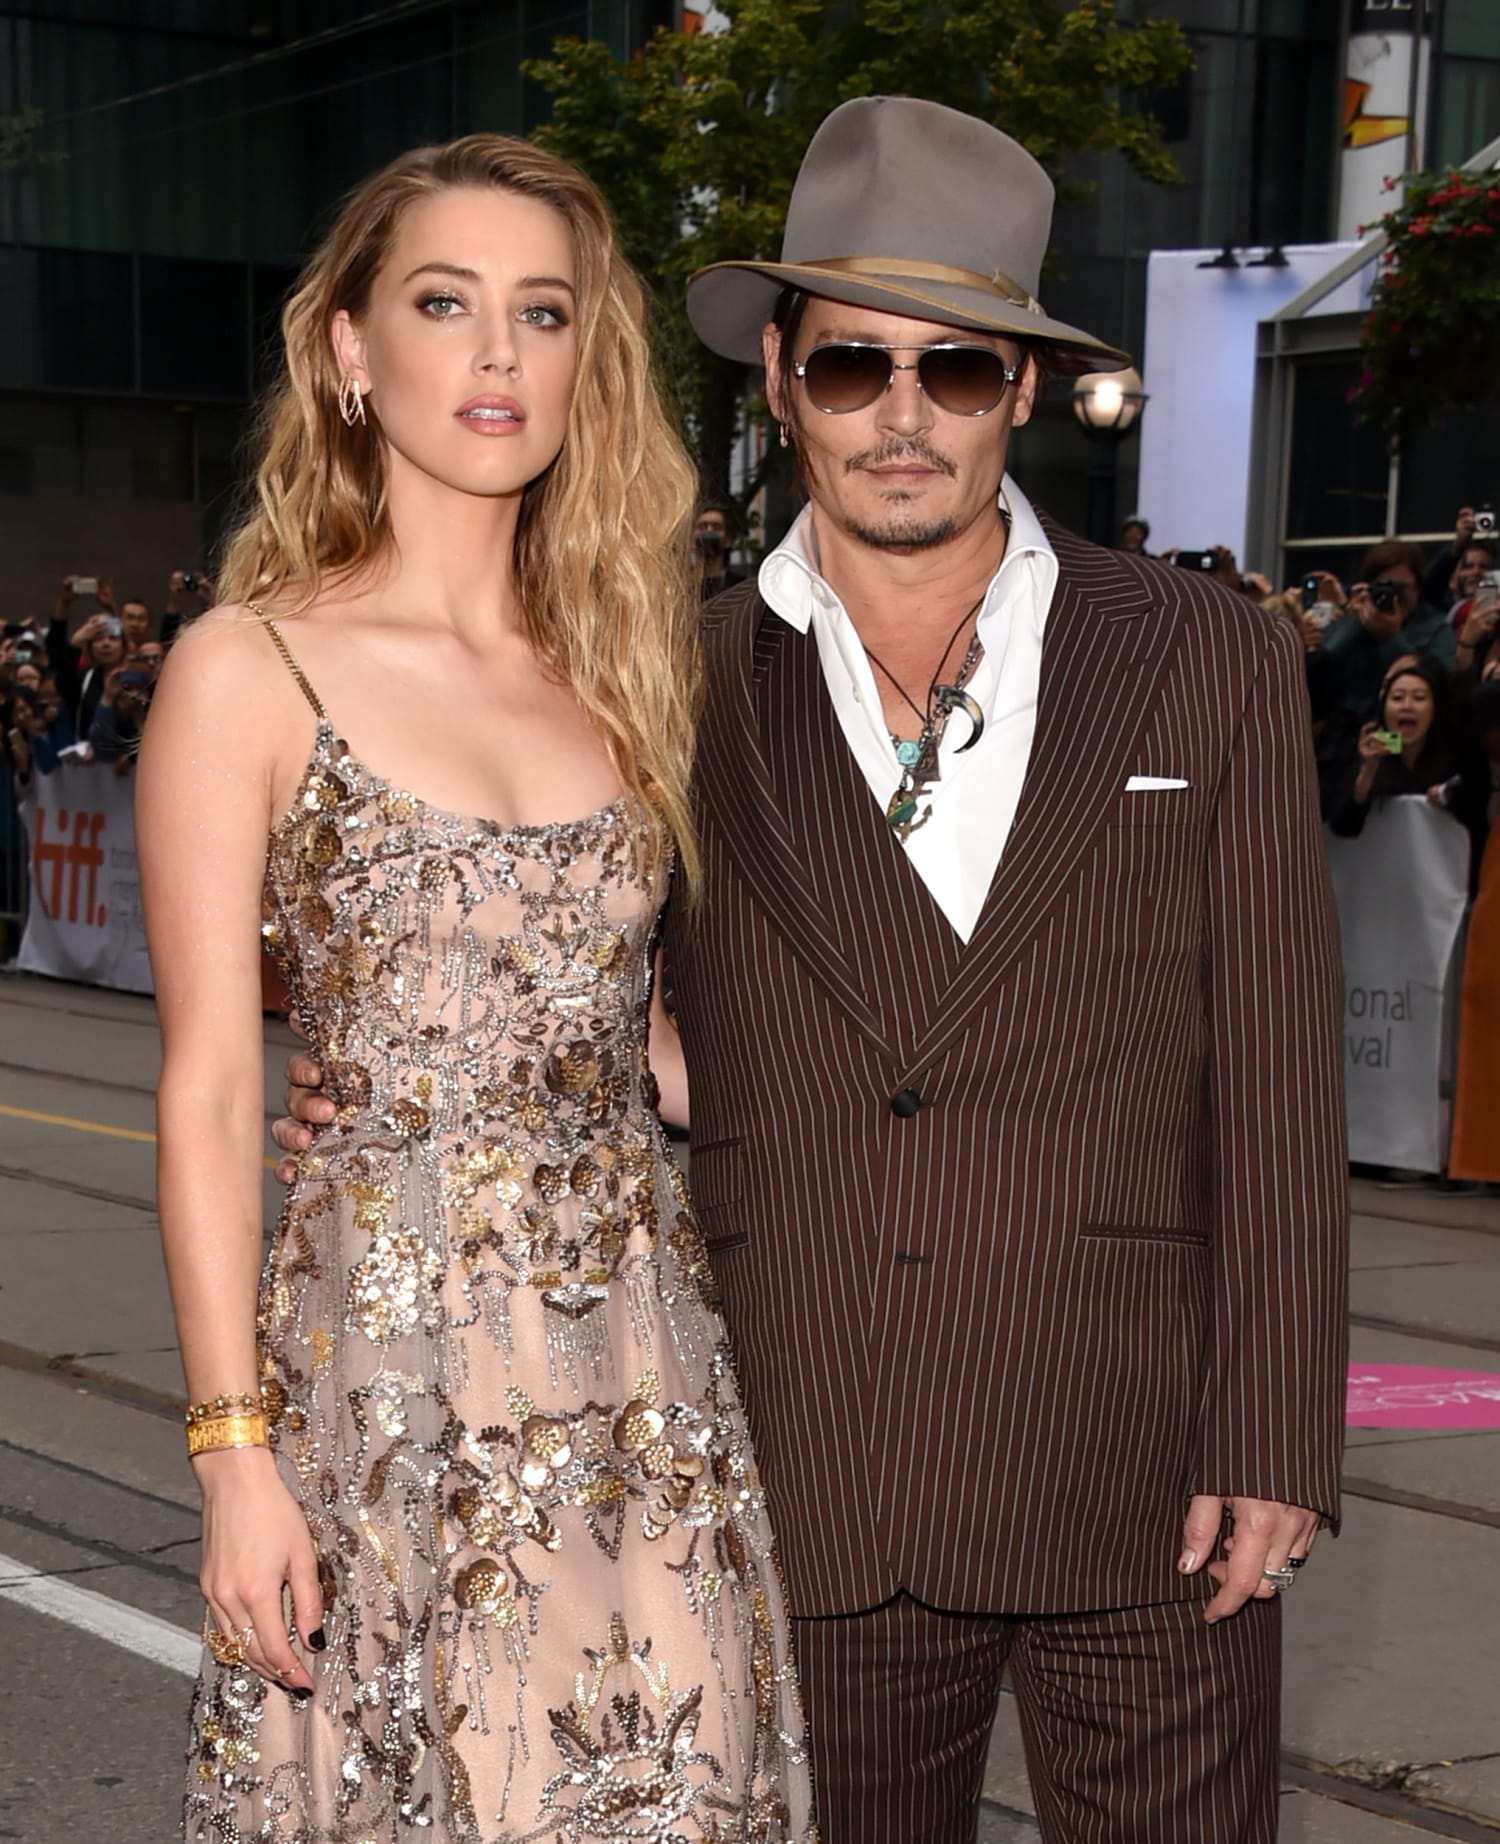 Johnny Depp and Amber Heard Relationship Timeline and Trial Summary